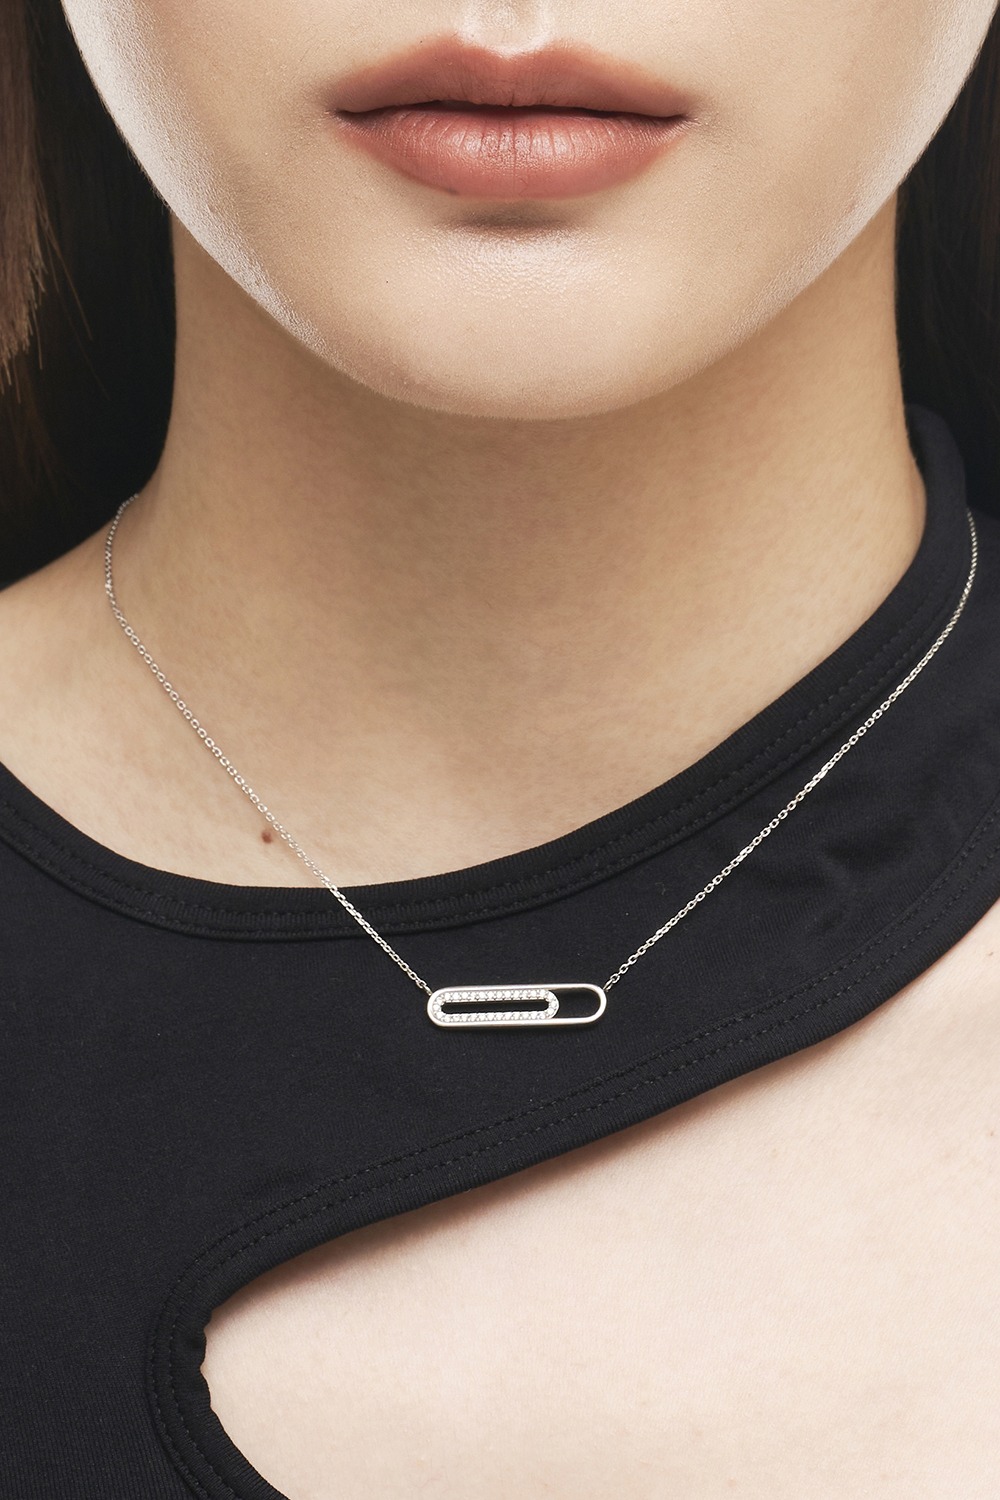 CAMILLE’S NAP NECKLACE